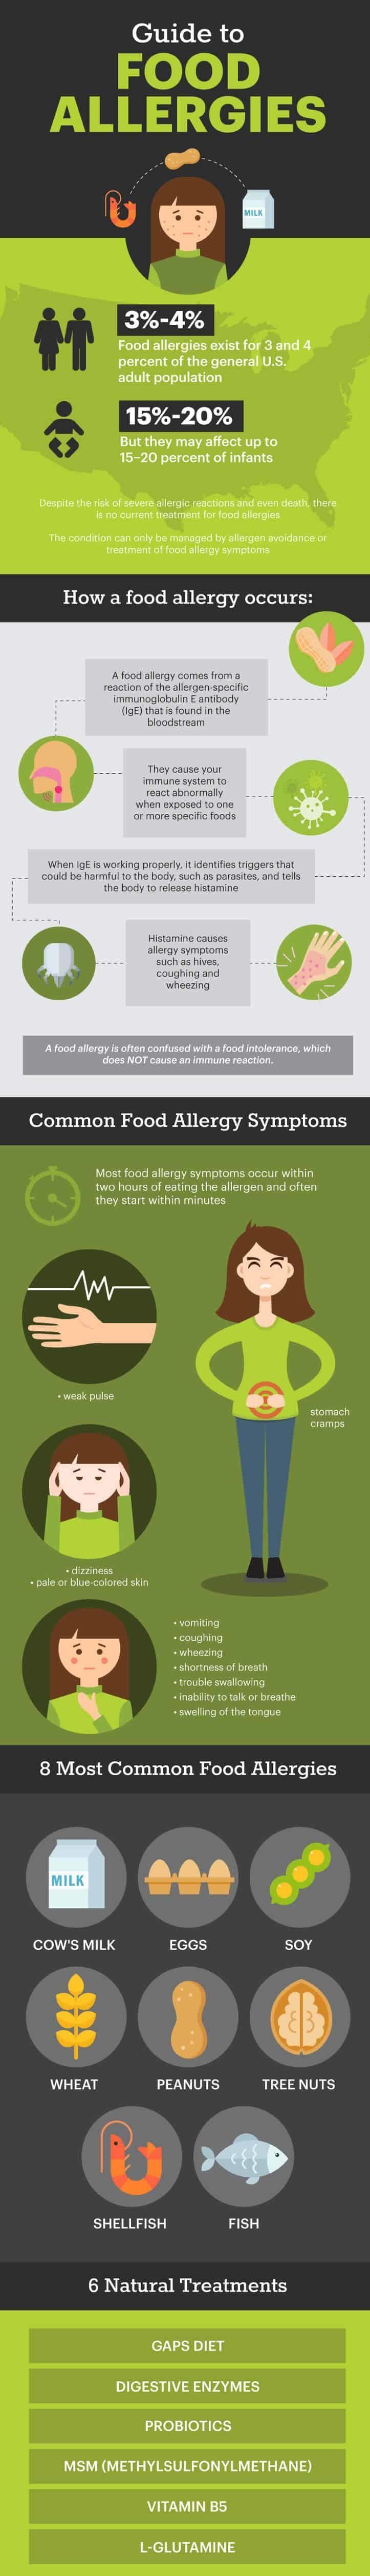 Food allergy guide - Dr. Axe